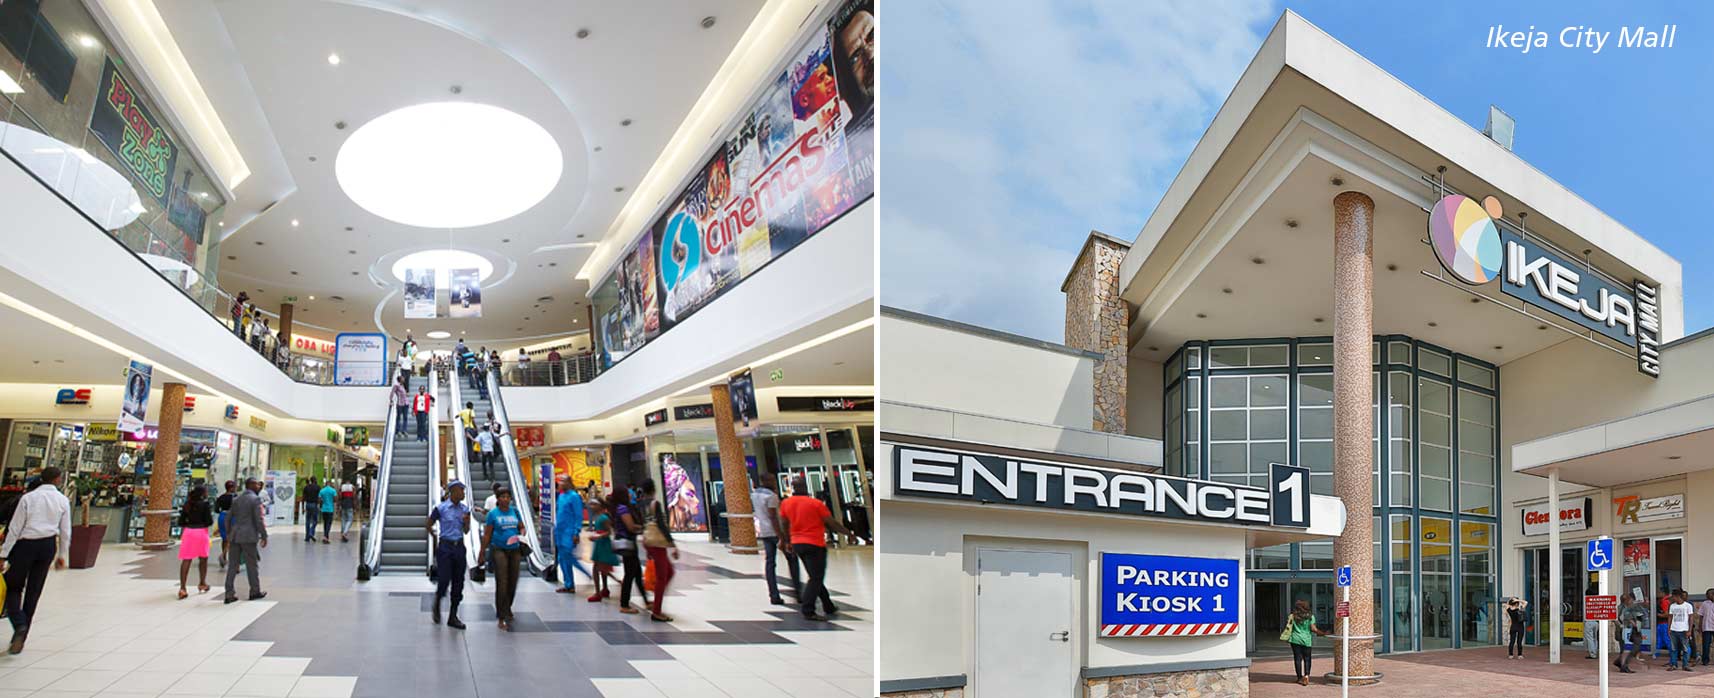 Co-Owner of Ikeja City Mall Plans to Convert to REIT by 2018